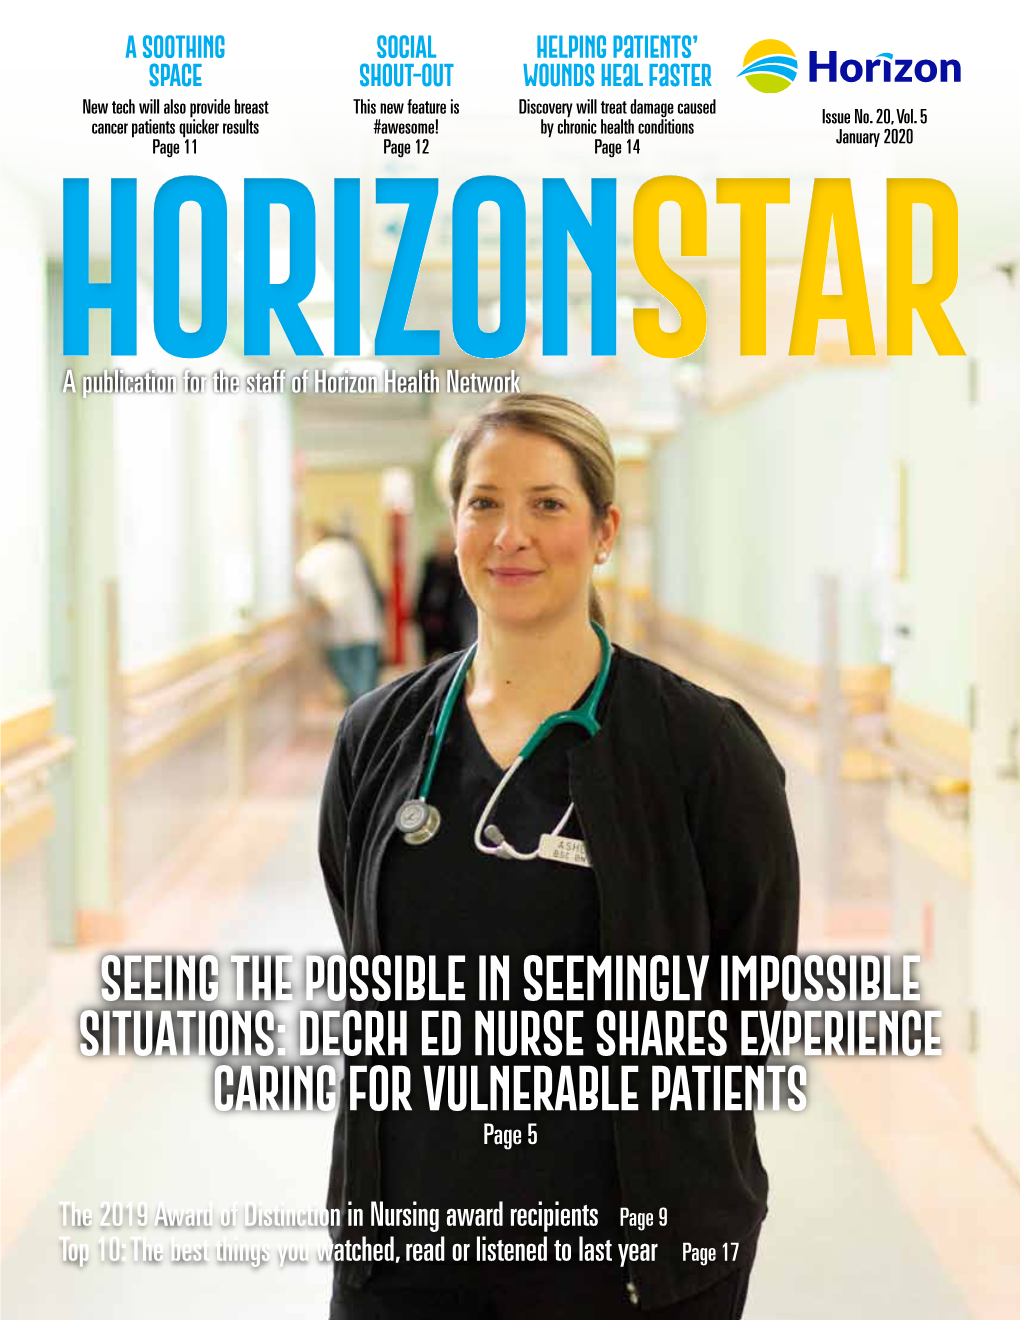 DECRH ED Nurse Shares Experience Caring for Vulnerable Patients Page 5